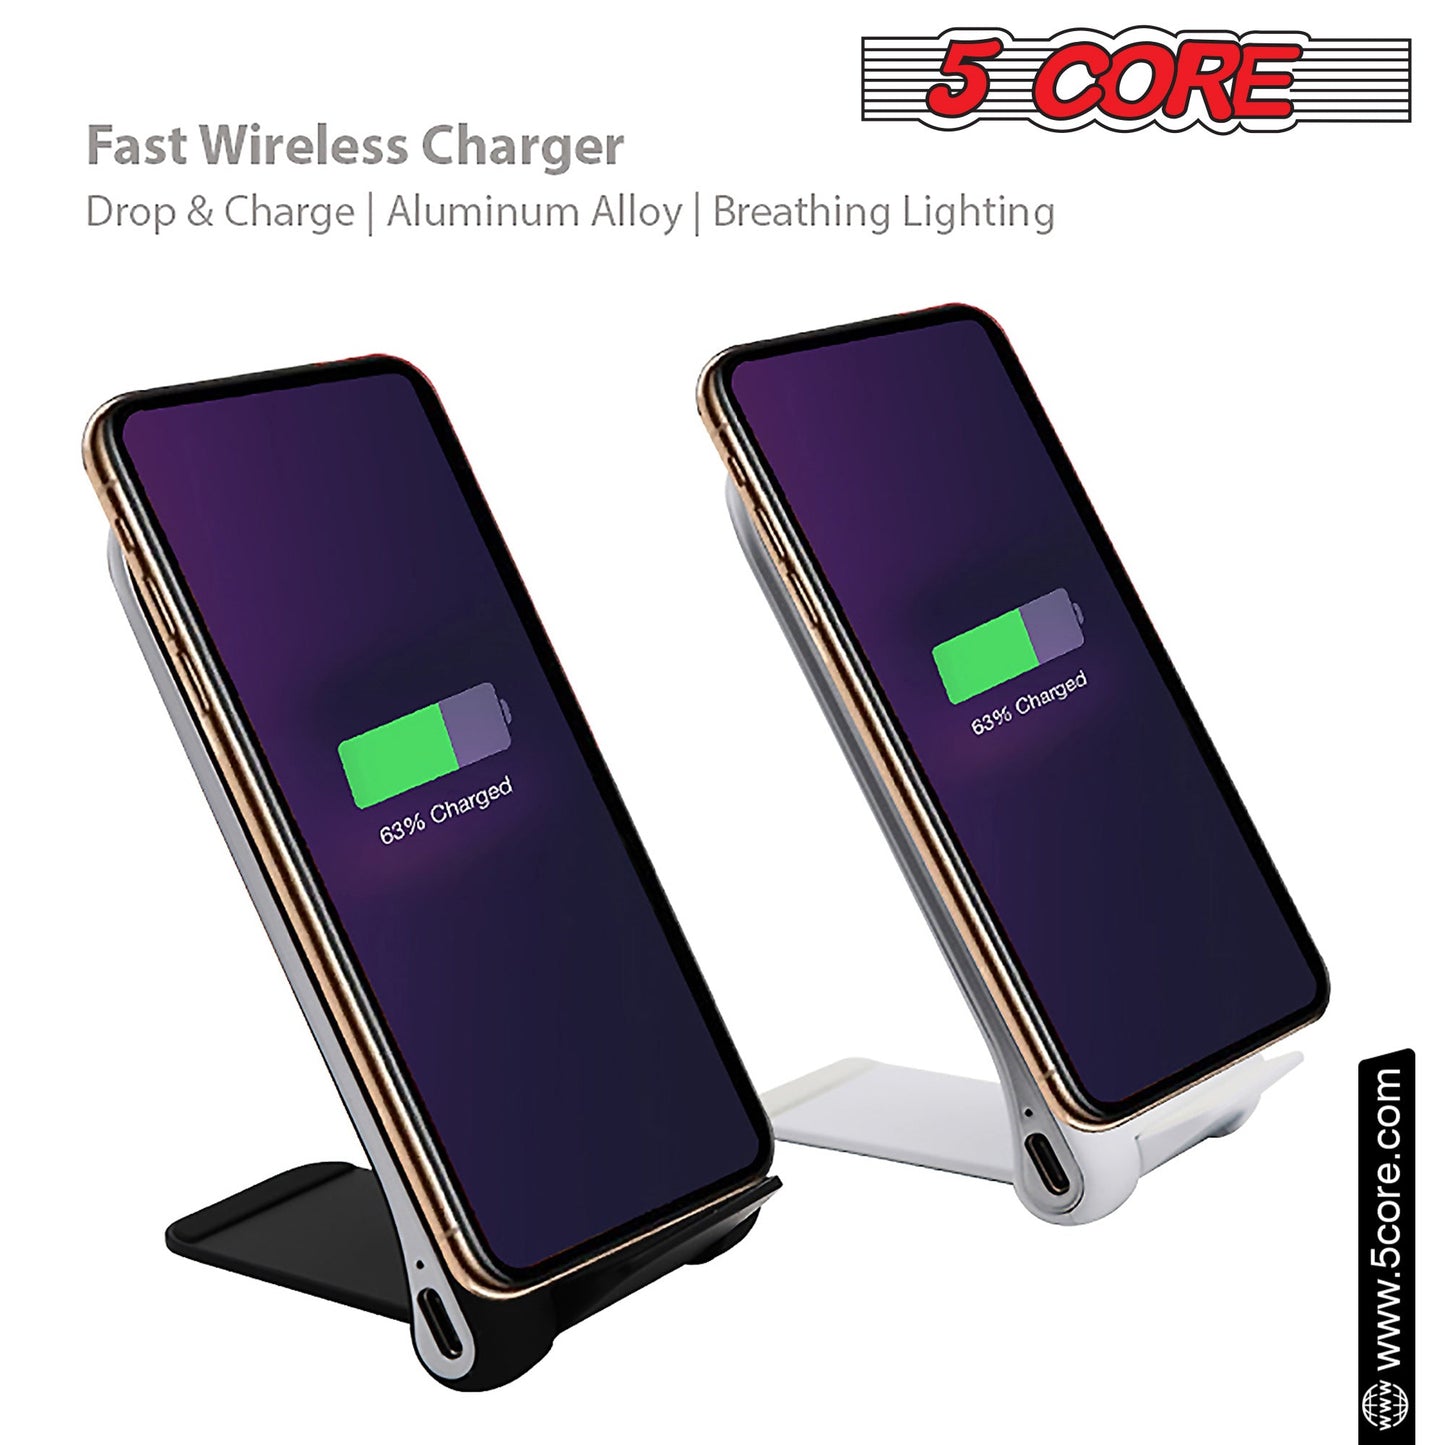 5 Core Magsafe Charger 2 Pieces Black and White Portable Wireless Charging Station Fast Phone Charger Stand w Sleep Friendly LED 2 Charging Coil Samsumg iPhone Wireless Fast Charging Stand - CDKW03-7